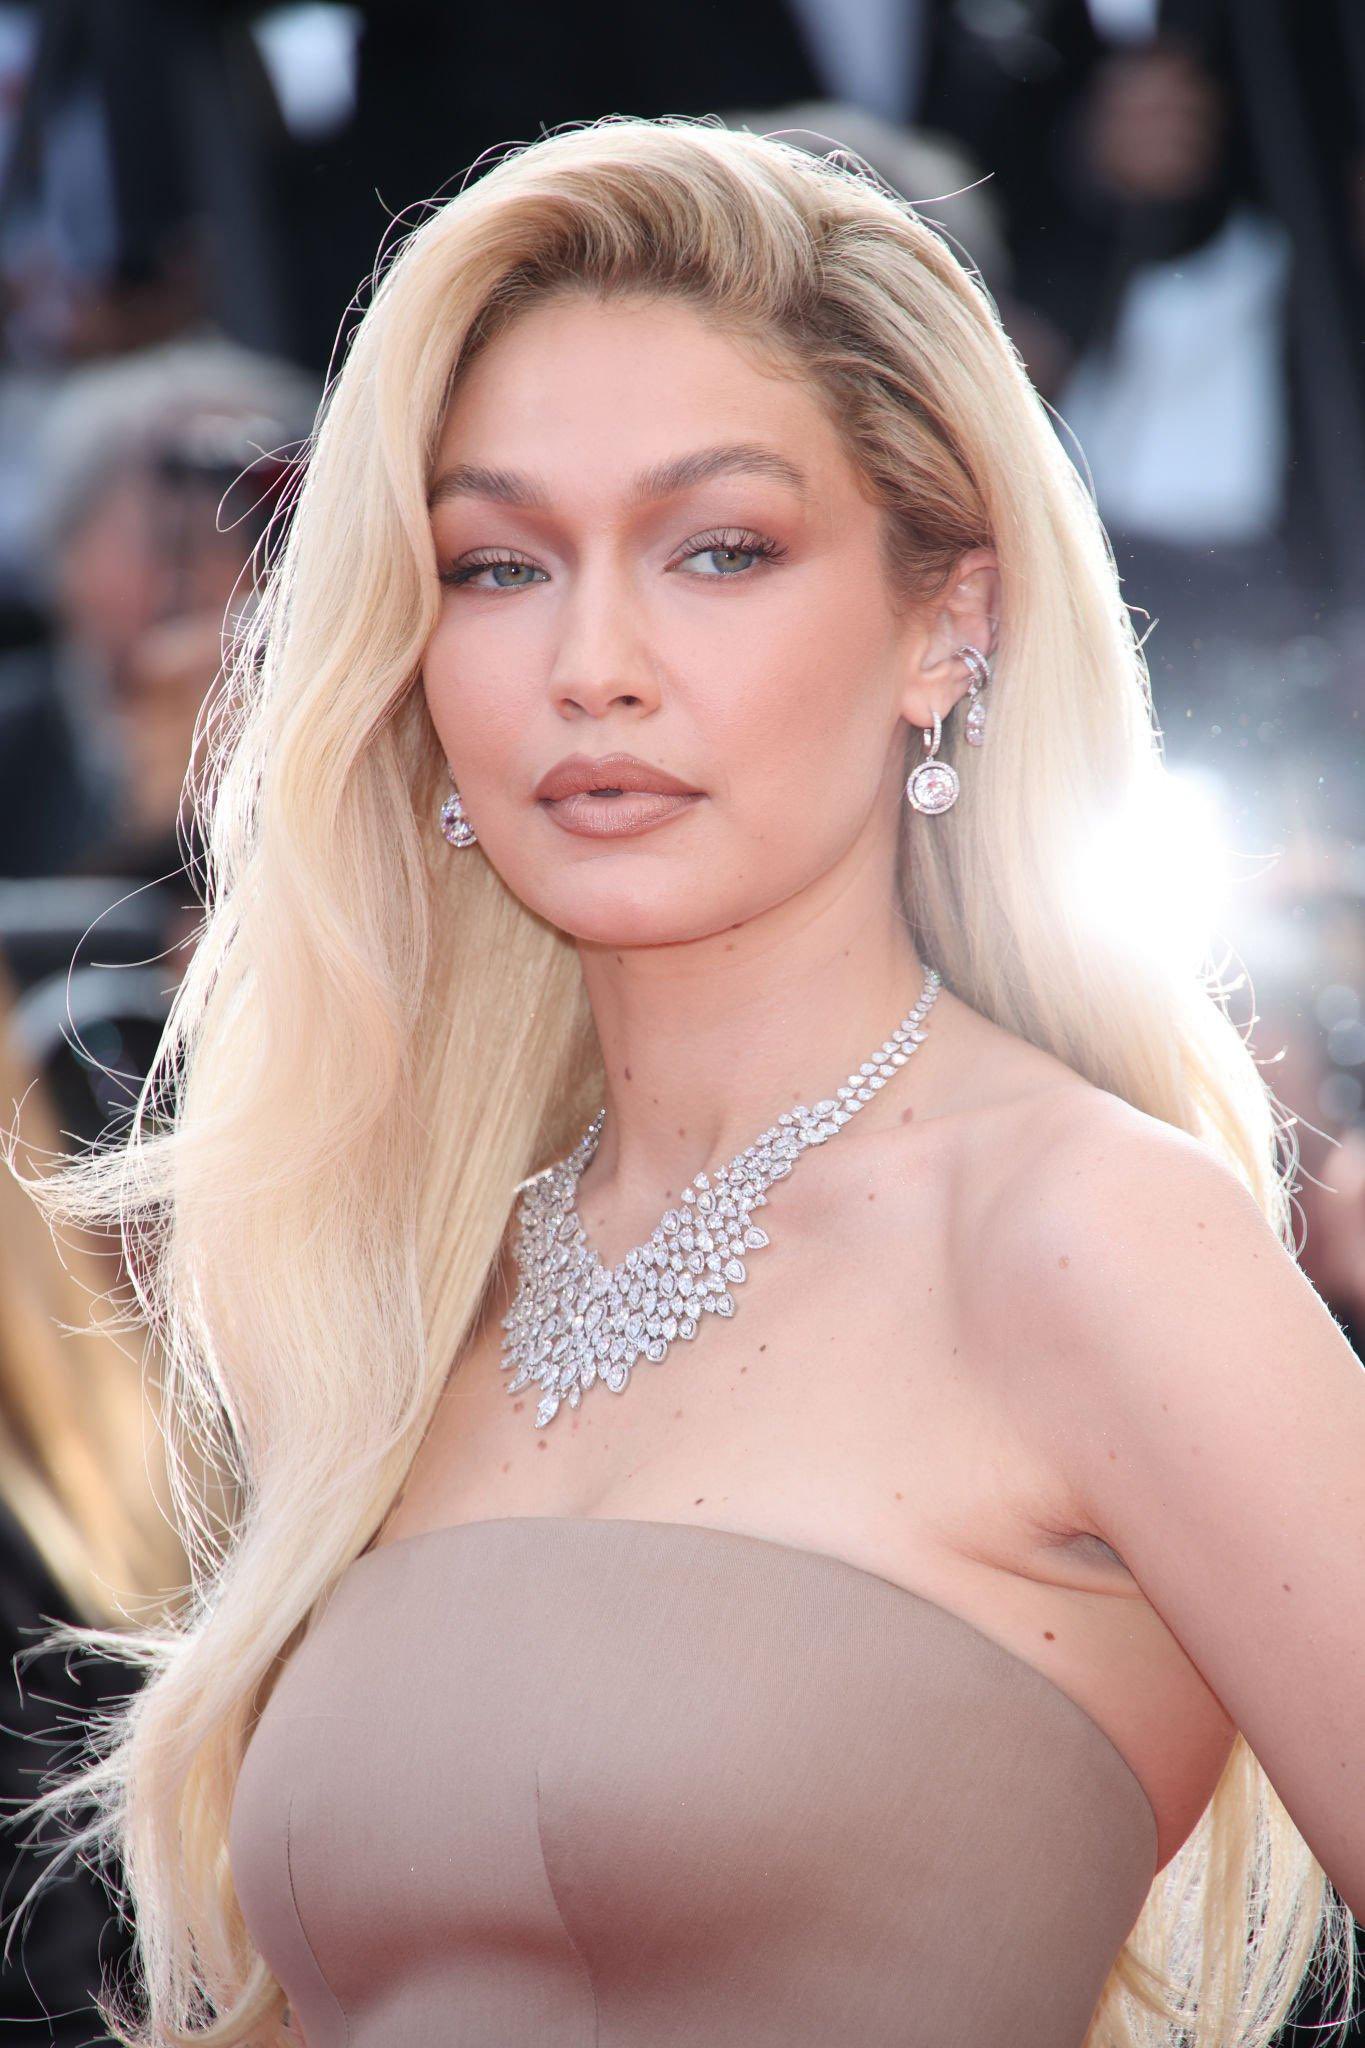 Gigi Hadid Recreated Her Sister Bella's Vintage Fishtail Gown at Cannes